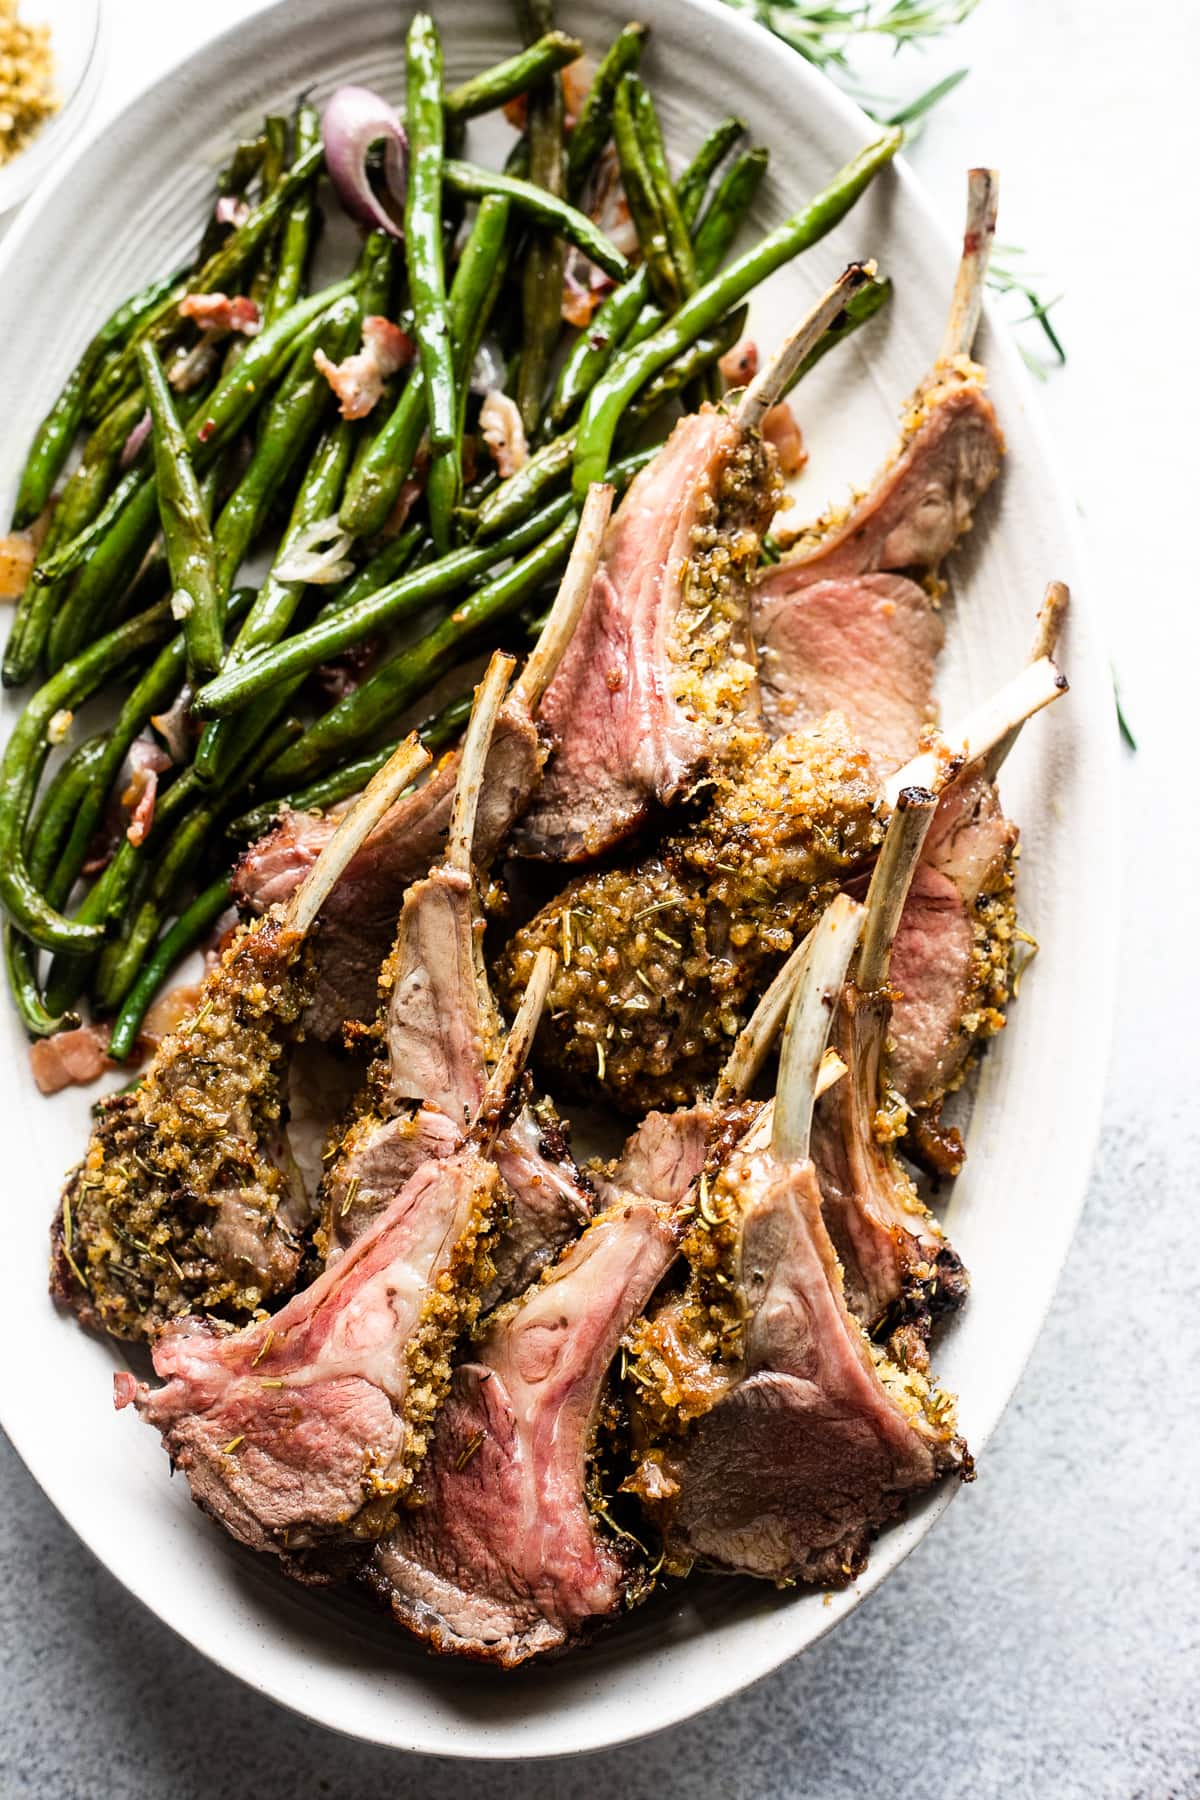 Lamb chops and green beans served on an oval plate.